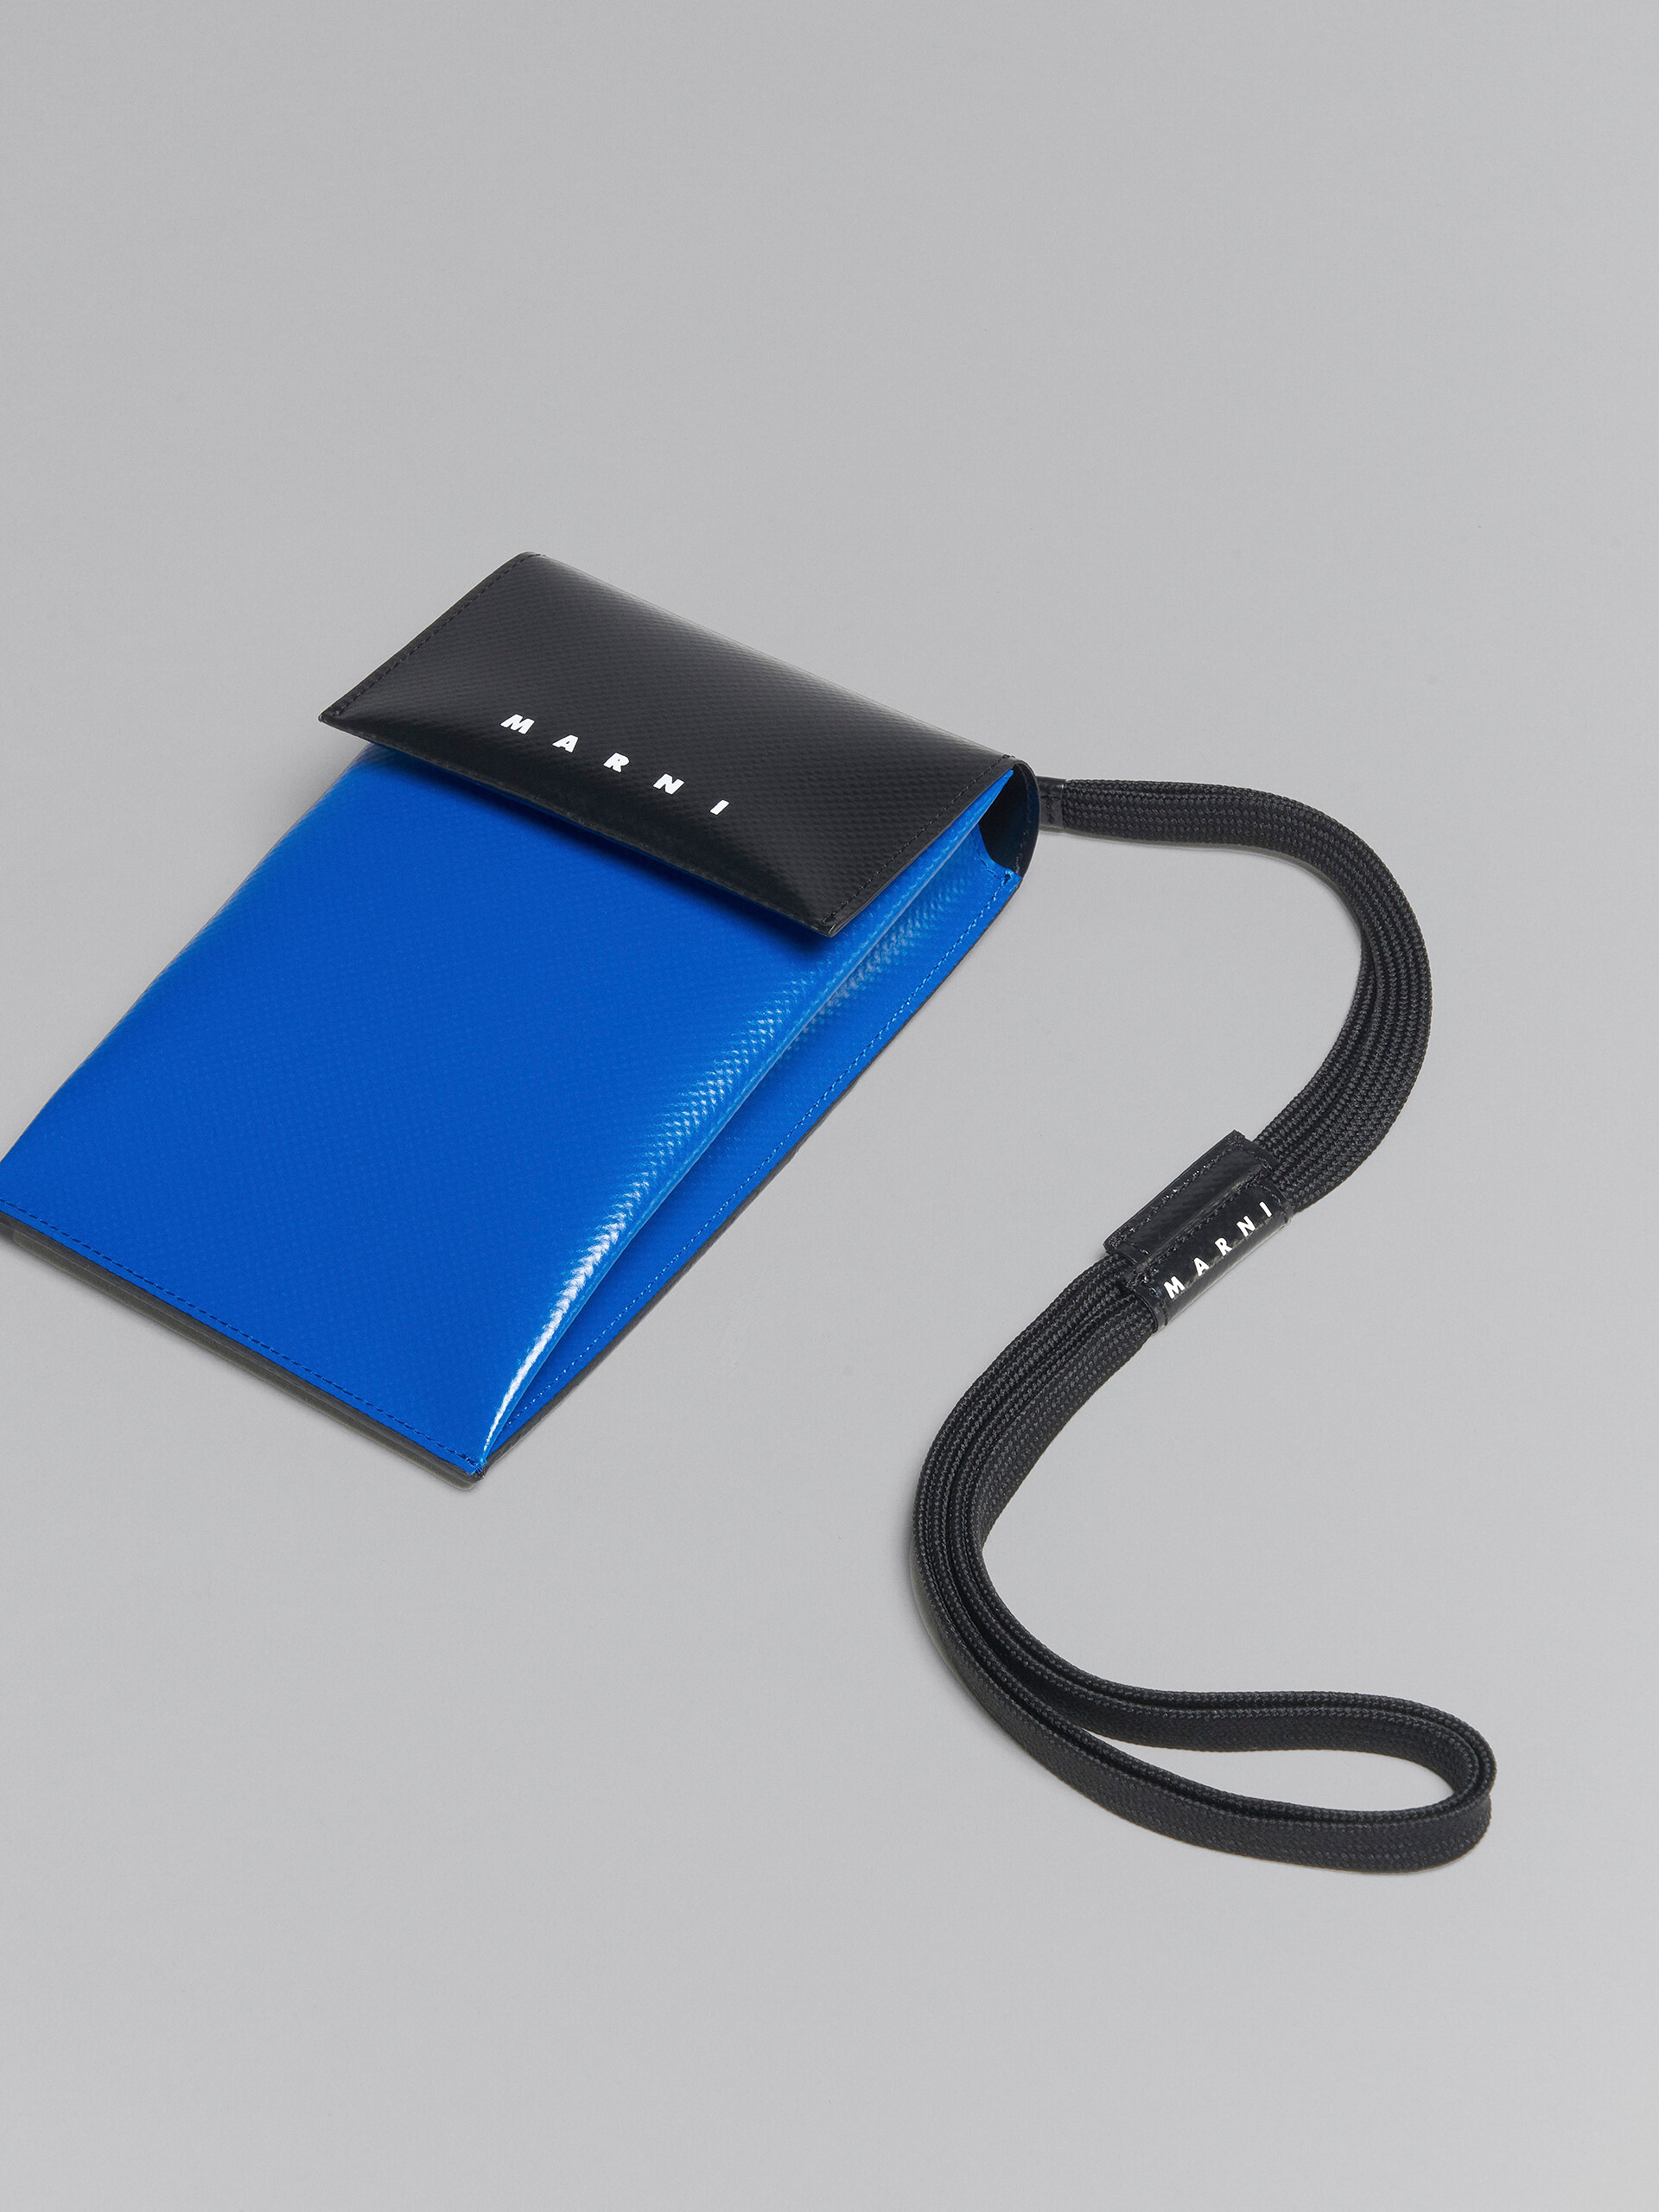 Black and blue phone case - Wallets and Small Leather Goods - Image 5